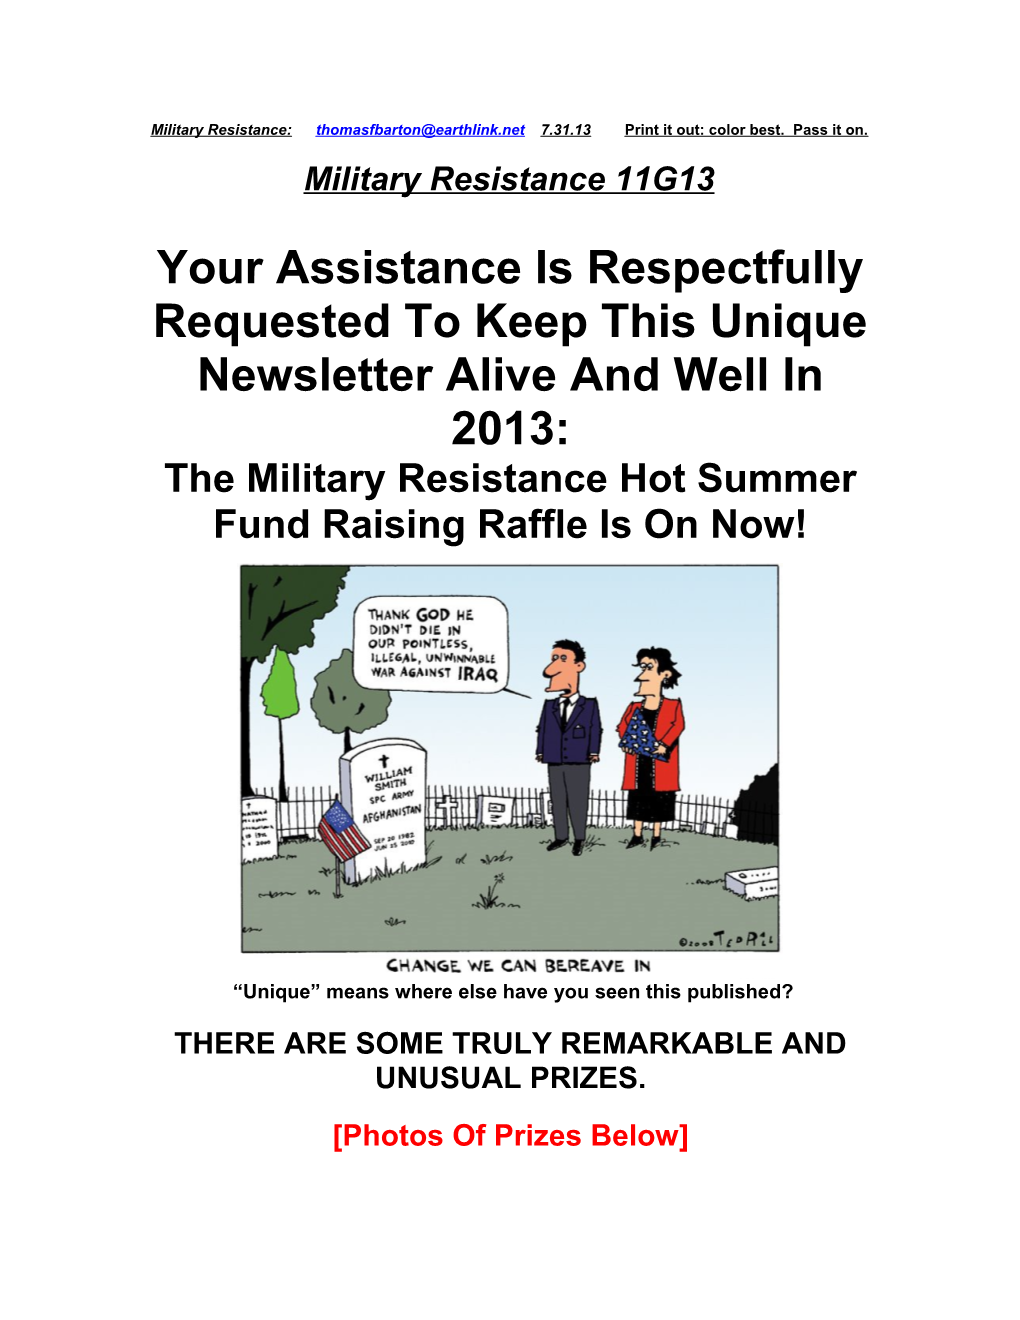 Your Assistance Is Respectfully Requested to Keep This Unique Newsletter Alive and Well